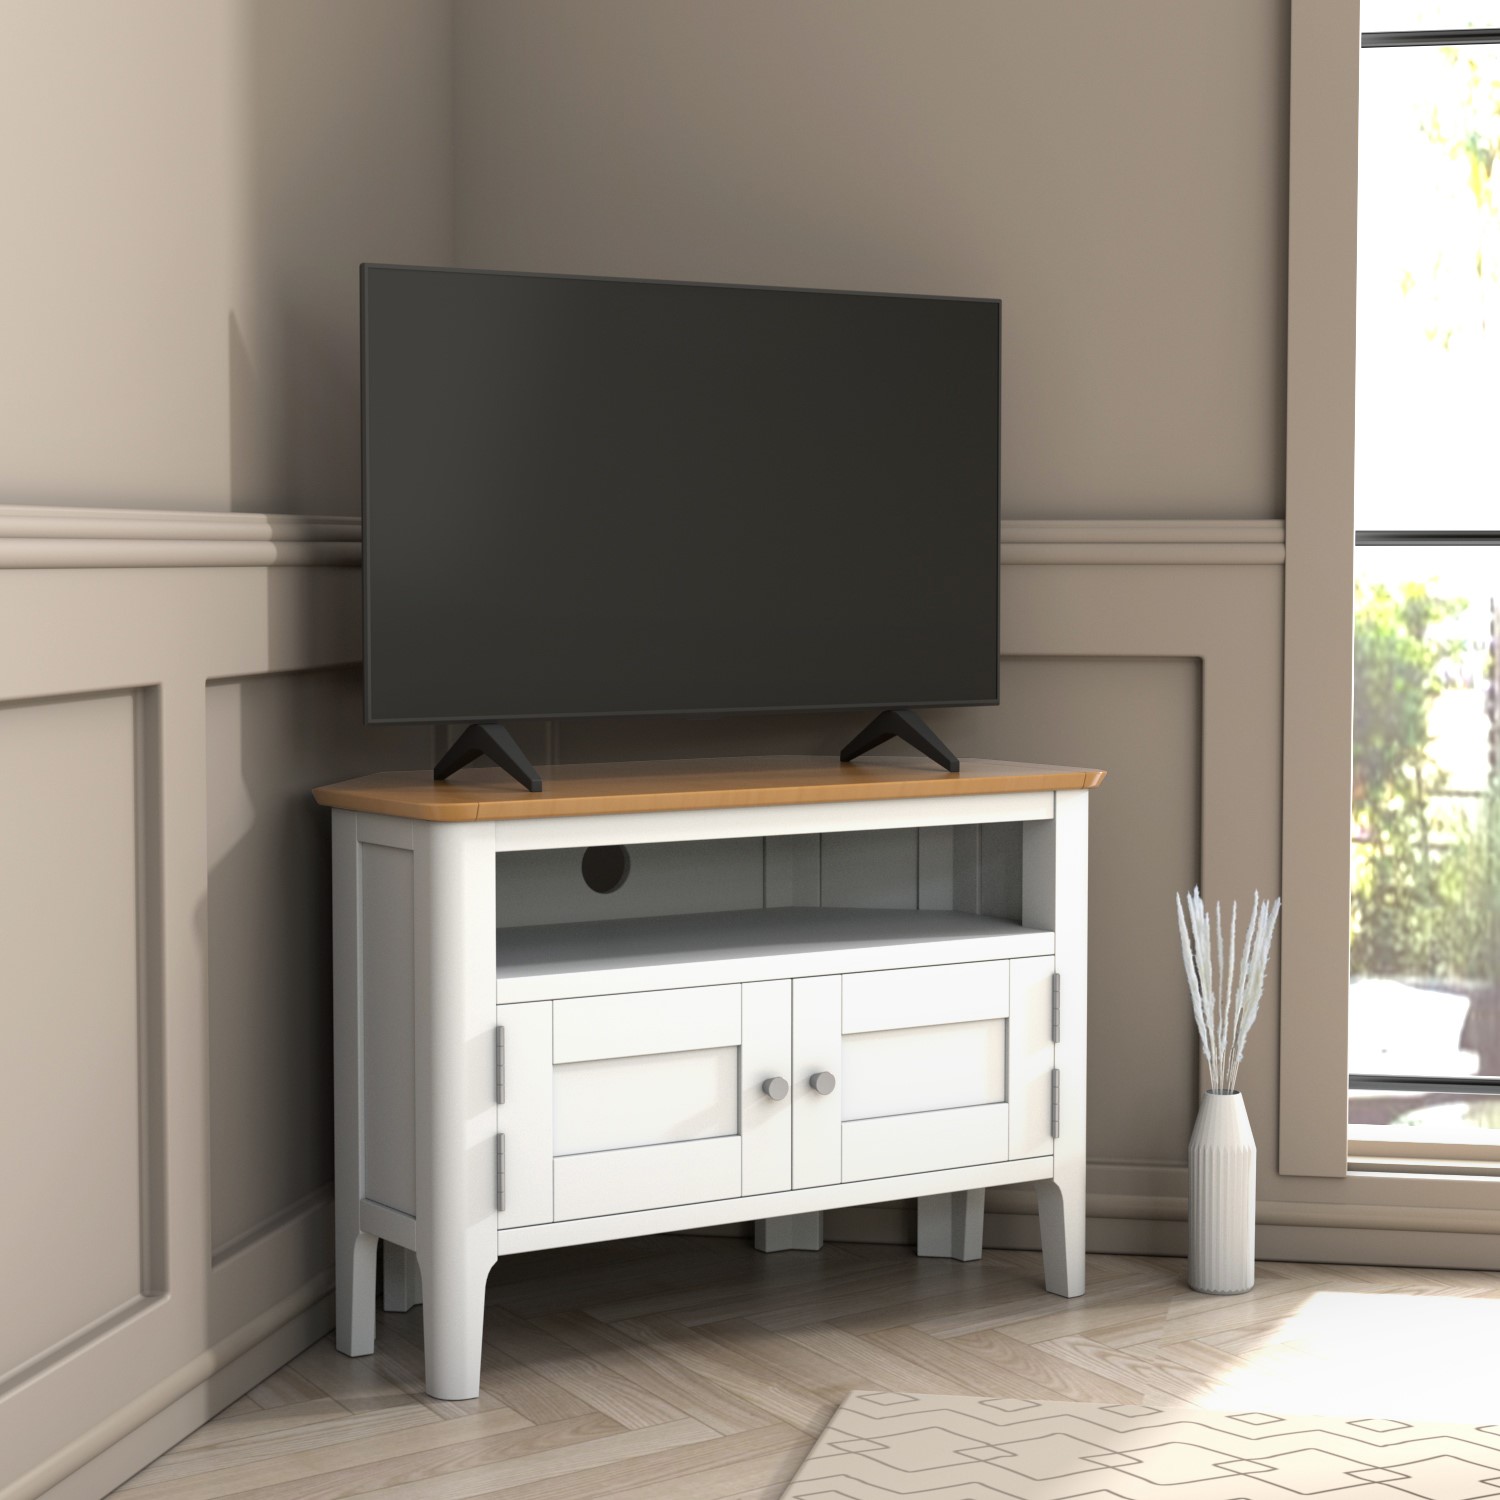 Photo of Small white & solid oak corner tv stand with storage - tvs up to 32 - adeline